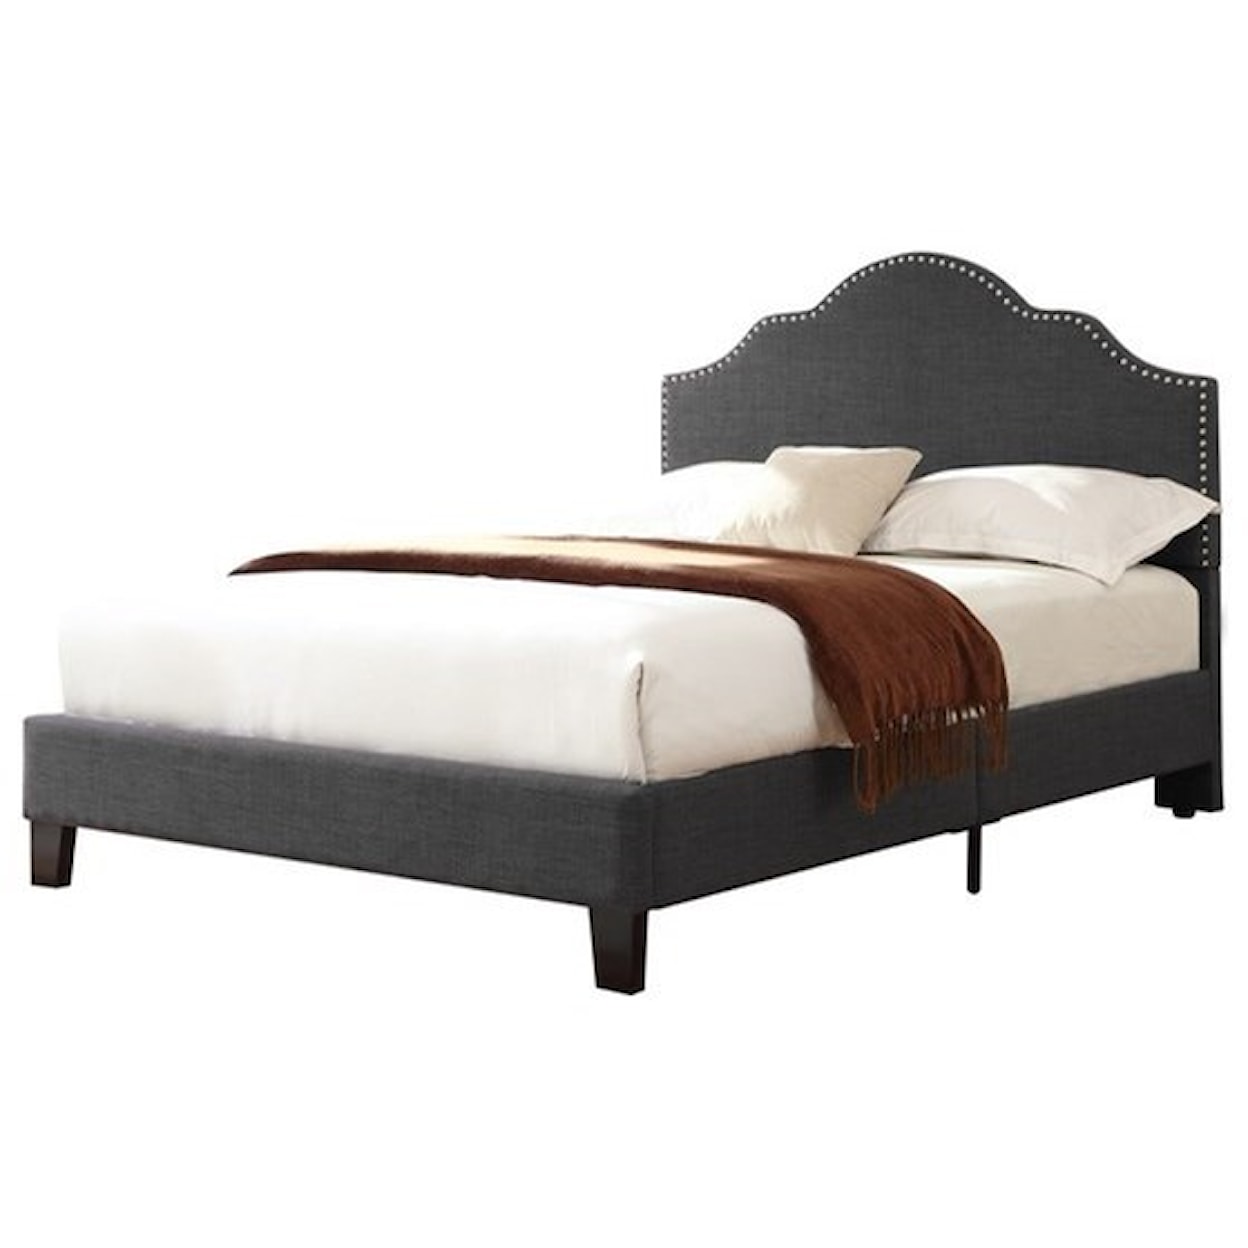 Emerald Madison Queen Upholstered Bed